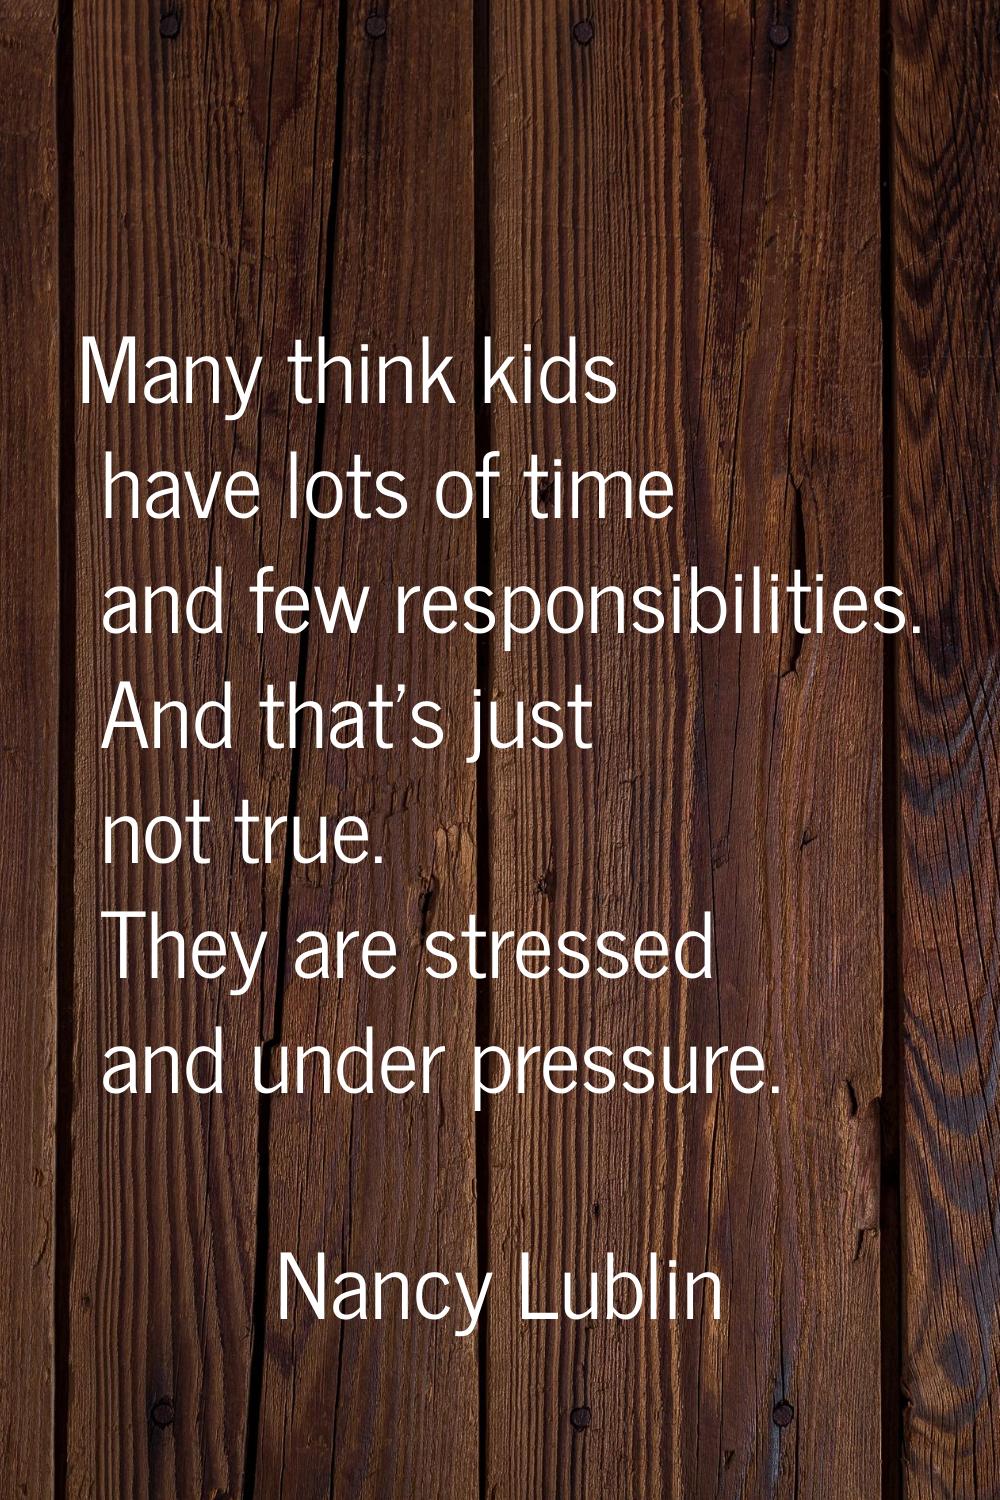 Many think kids have lots of time and few responsibilities. And that's just not true. They are stre